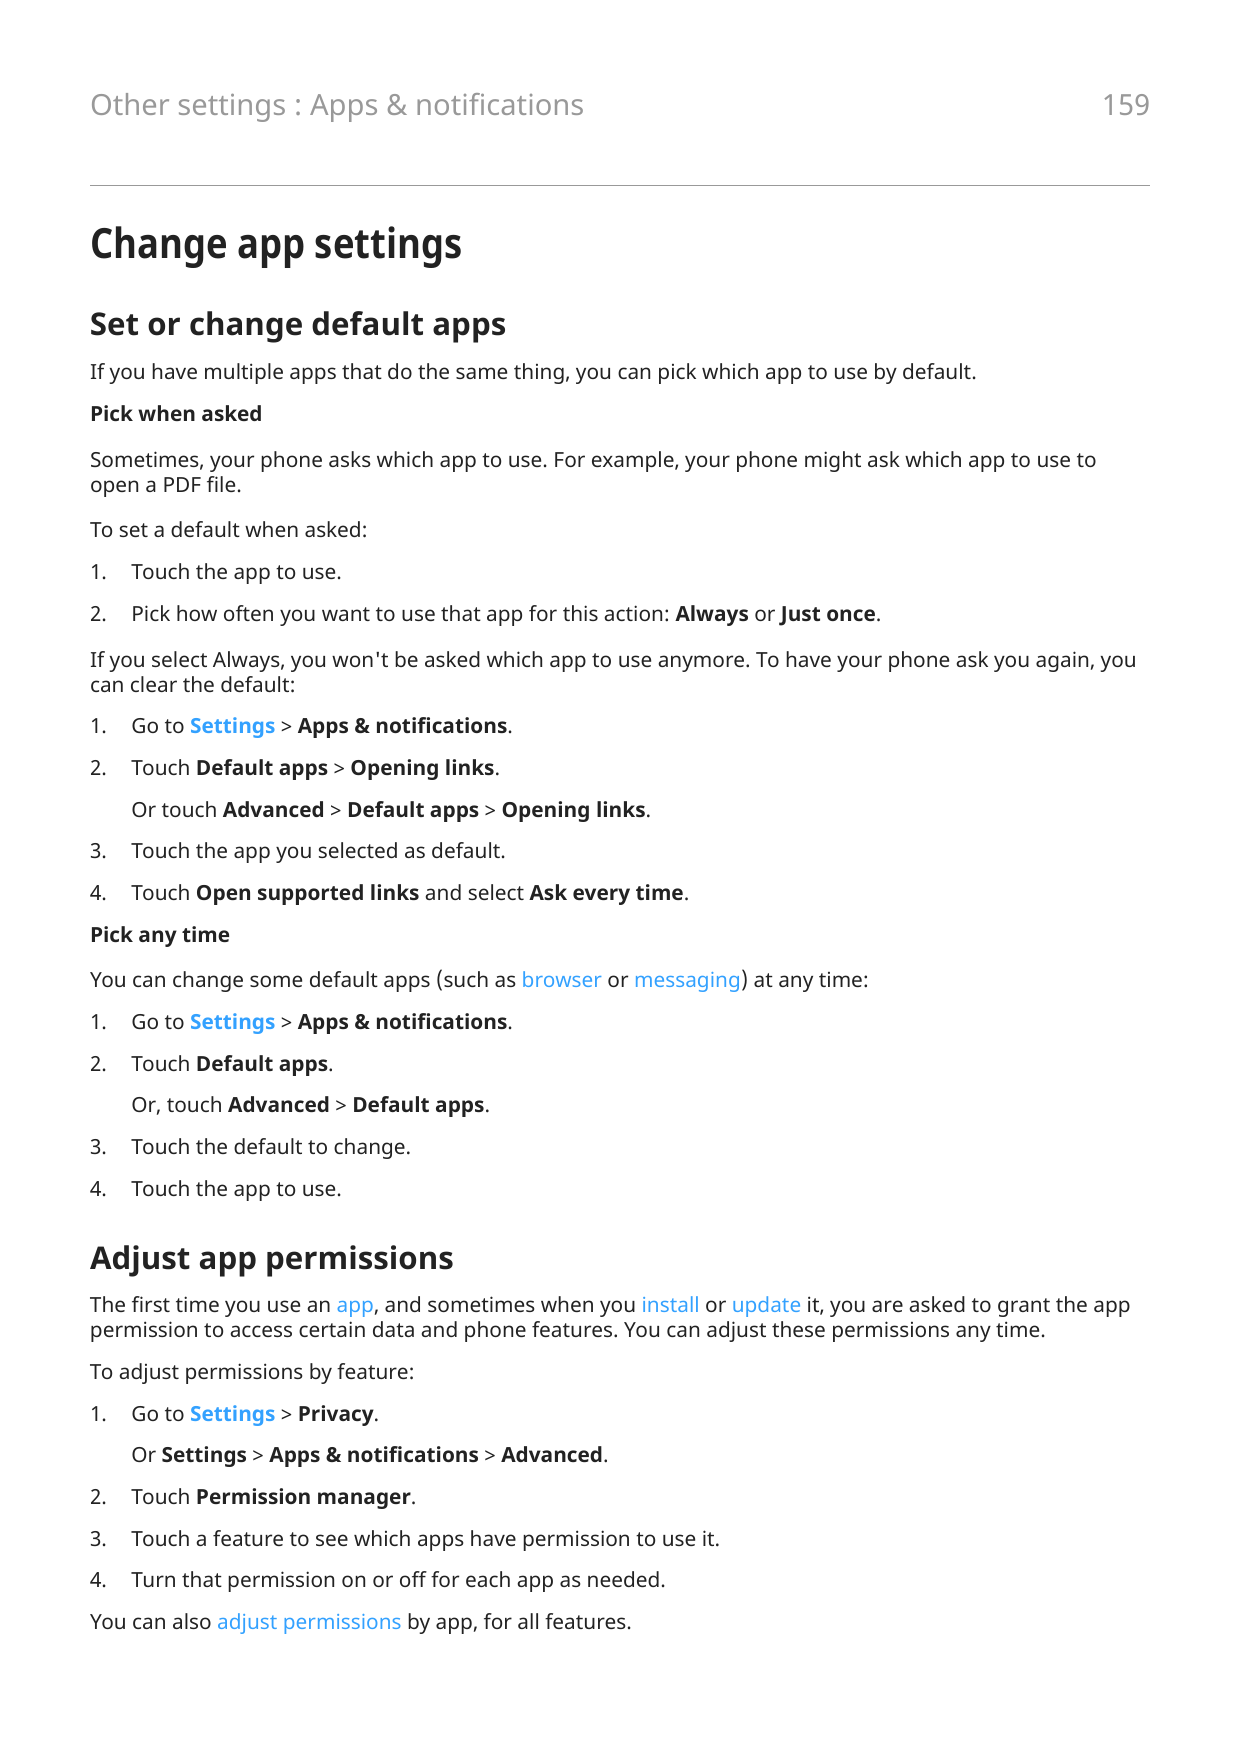 Other settings : Apps & notifications159Change app settingsSet or change default appsIf you have multiple apps that do the same 